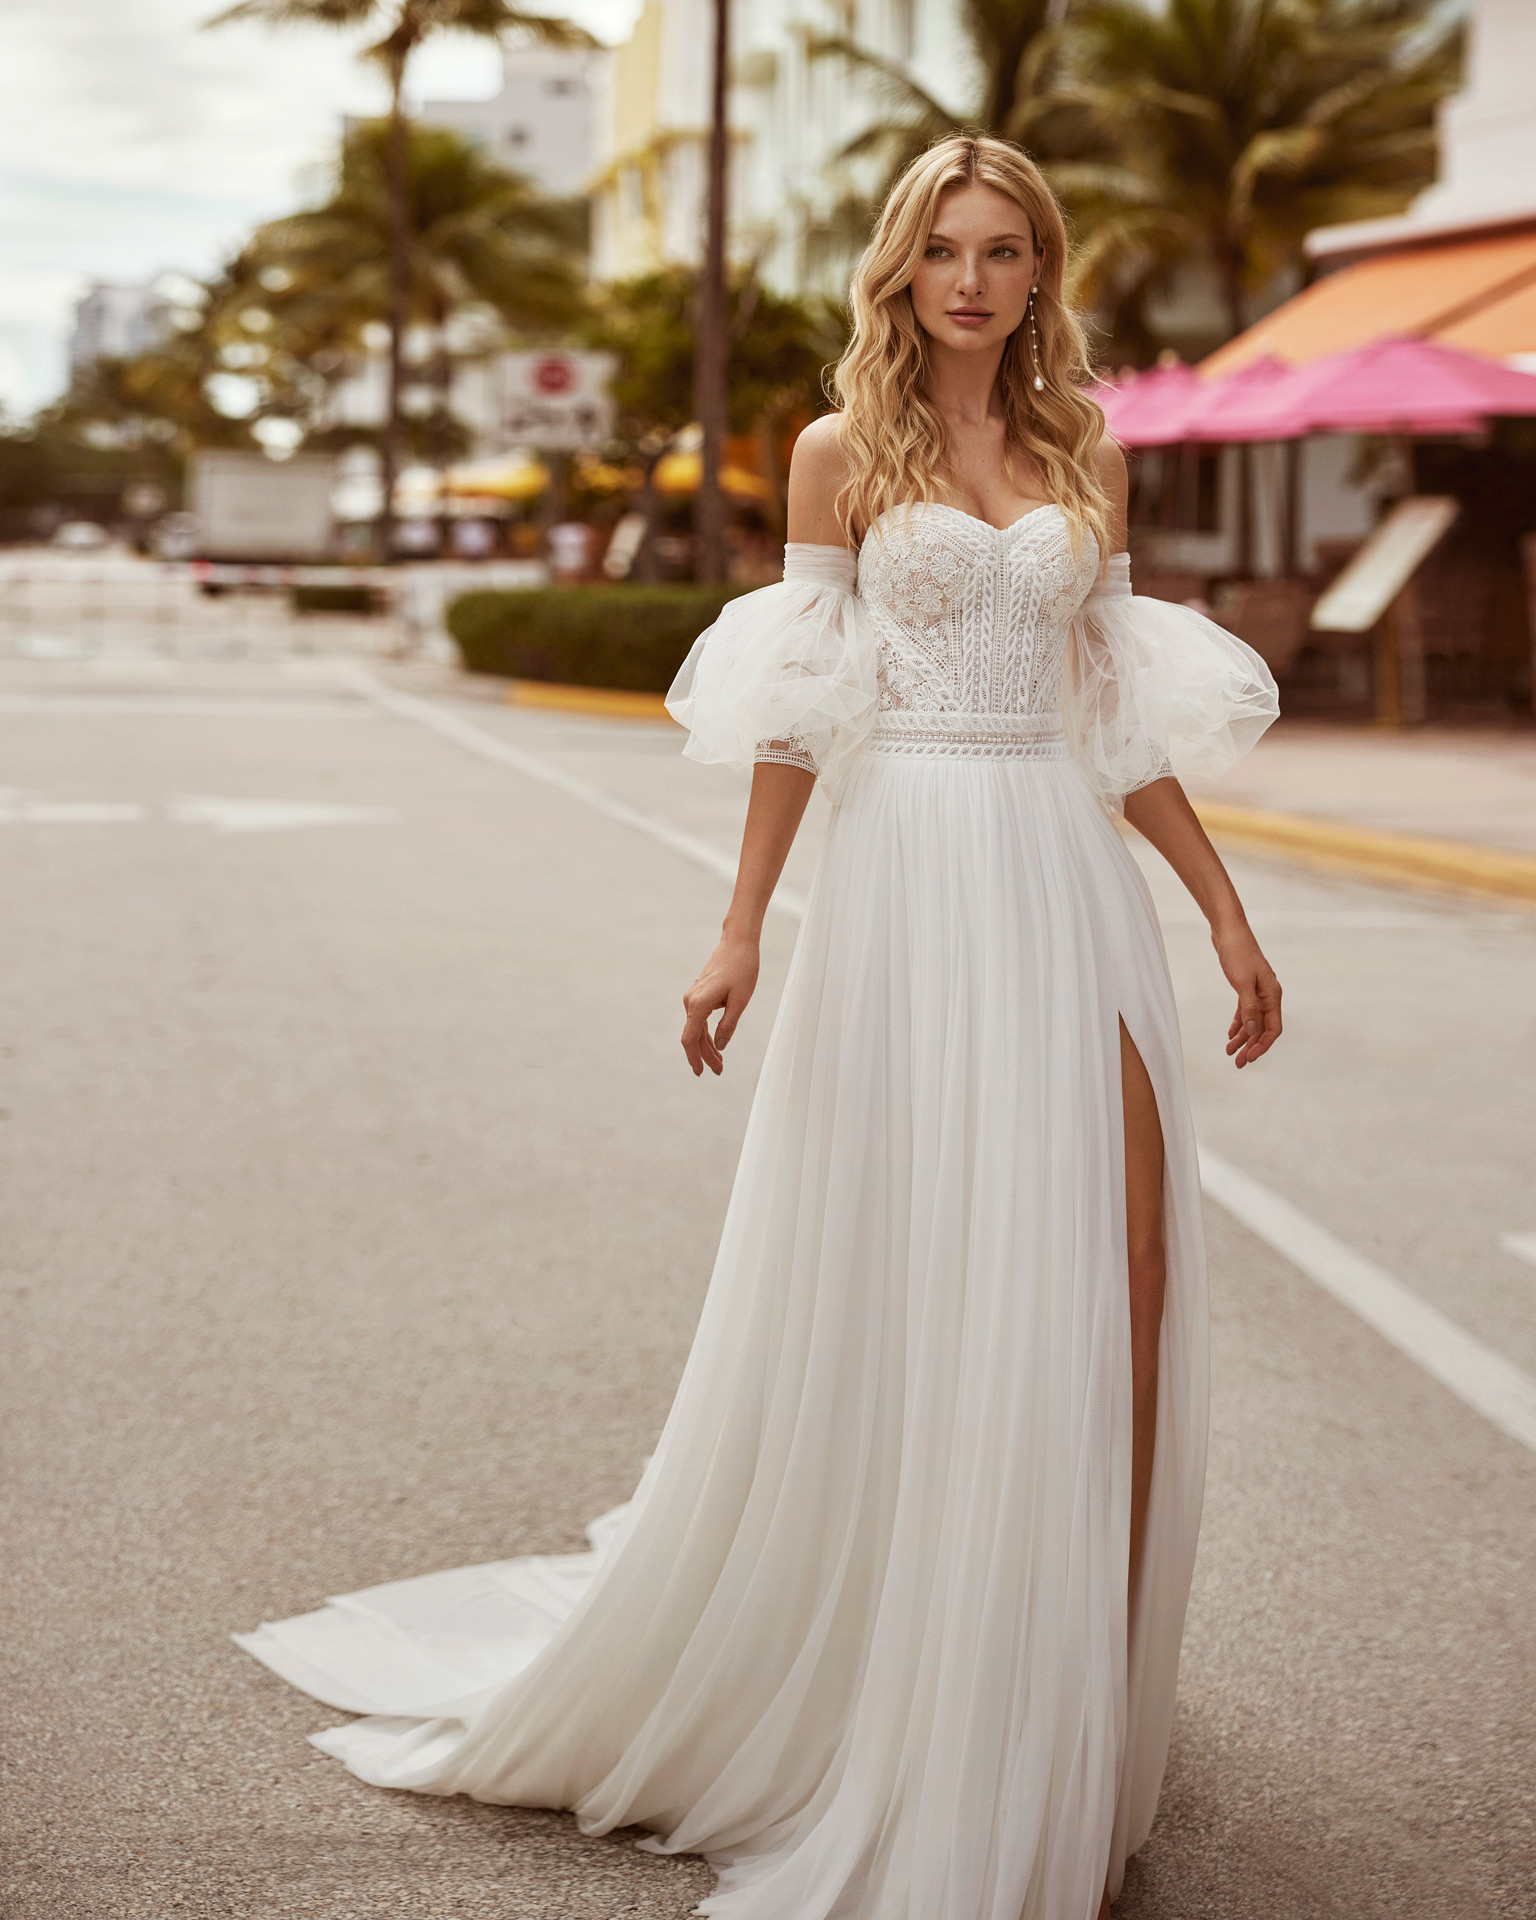 Princess-style A-line wedding dress, made in muslin combined with guipure lace. This delicate Luna Novias design features a sweetheart neckline, detachable sleeves and skirt with a front slit. LUNA_NOVIAS.